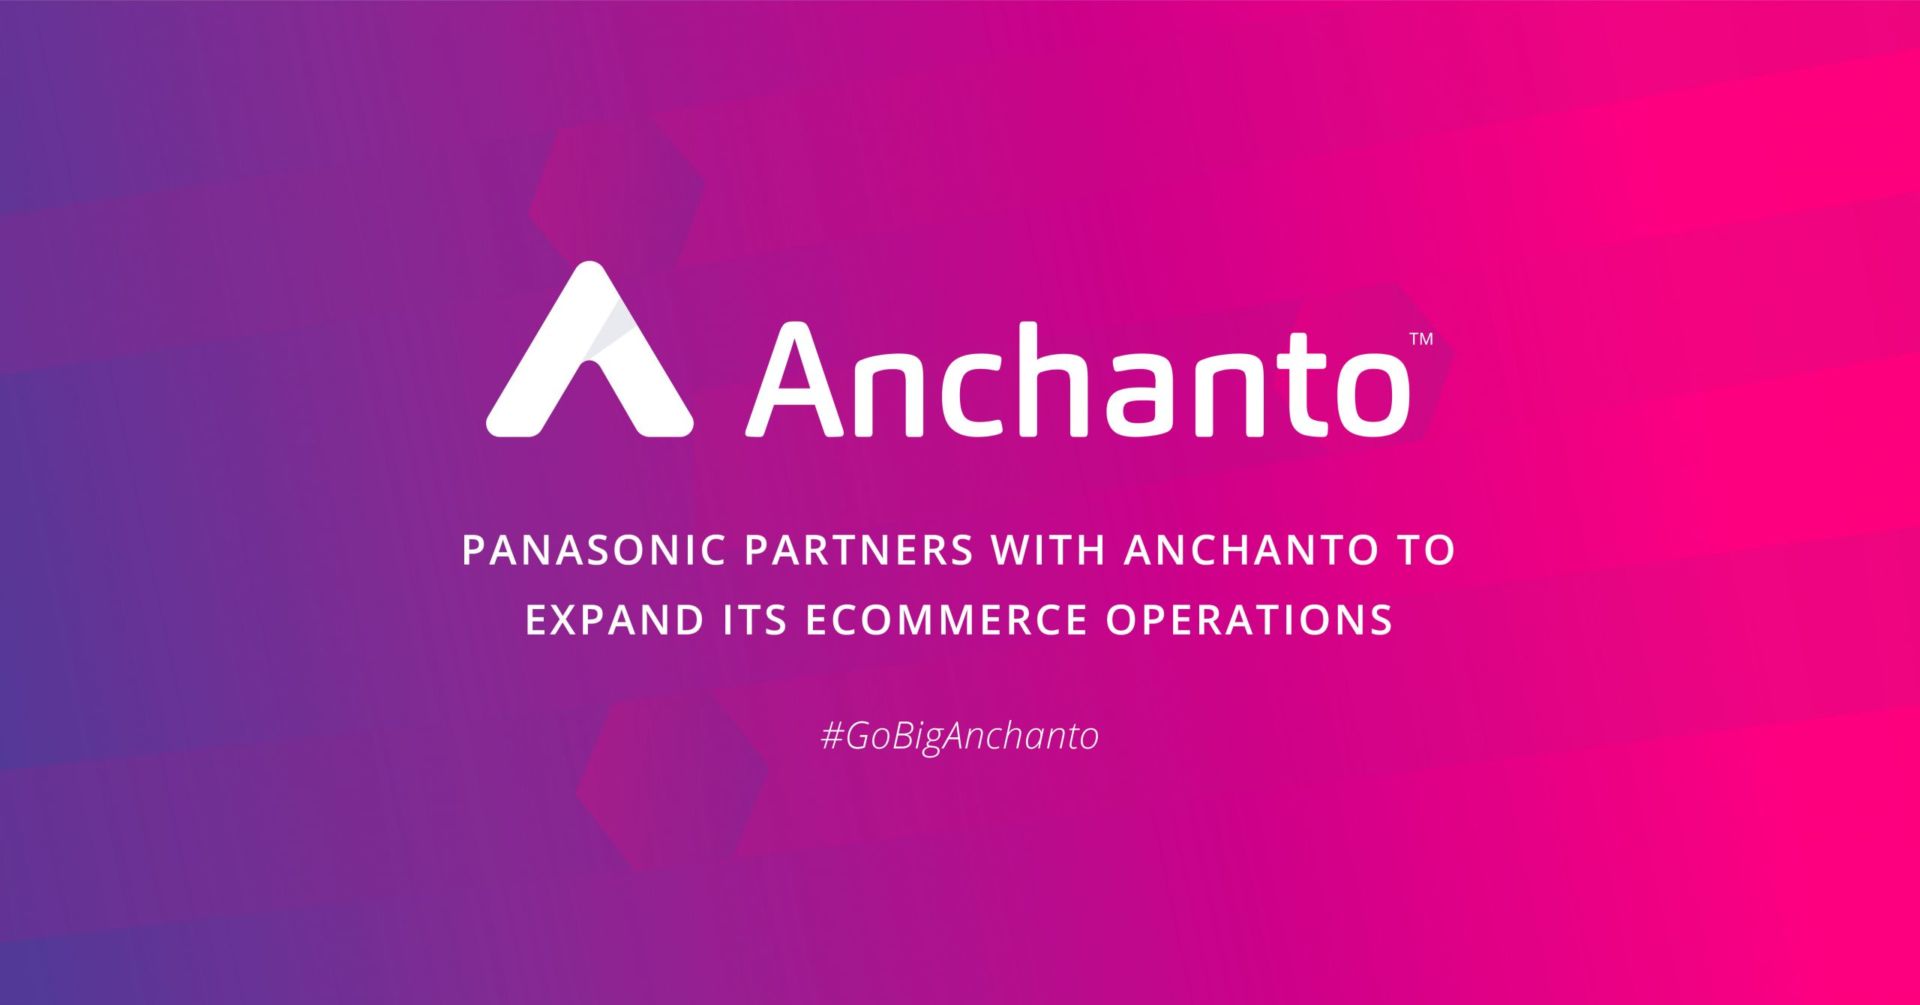 Panasonic Announces E-commerce Expansion Across Asia-Pacific in Partnership with Anchanto